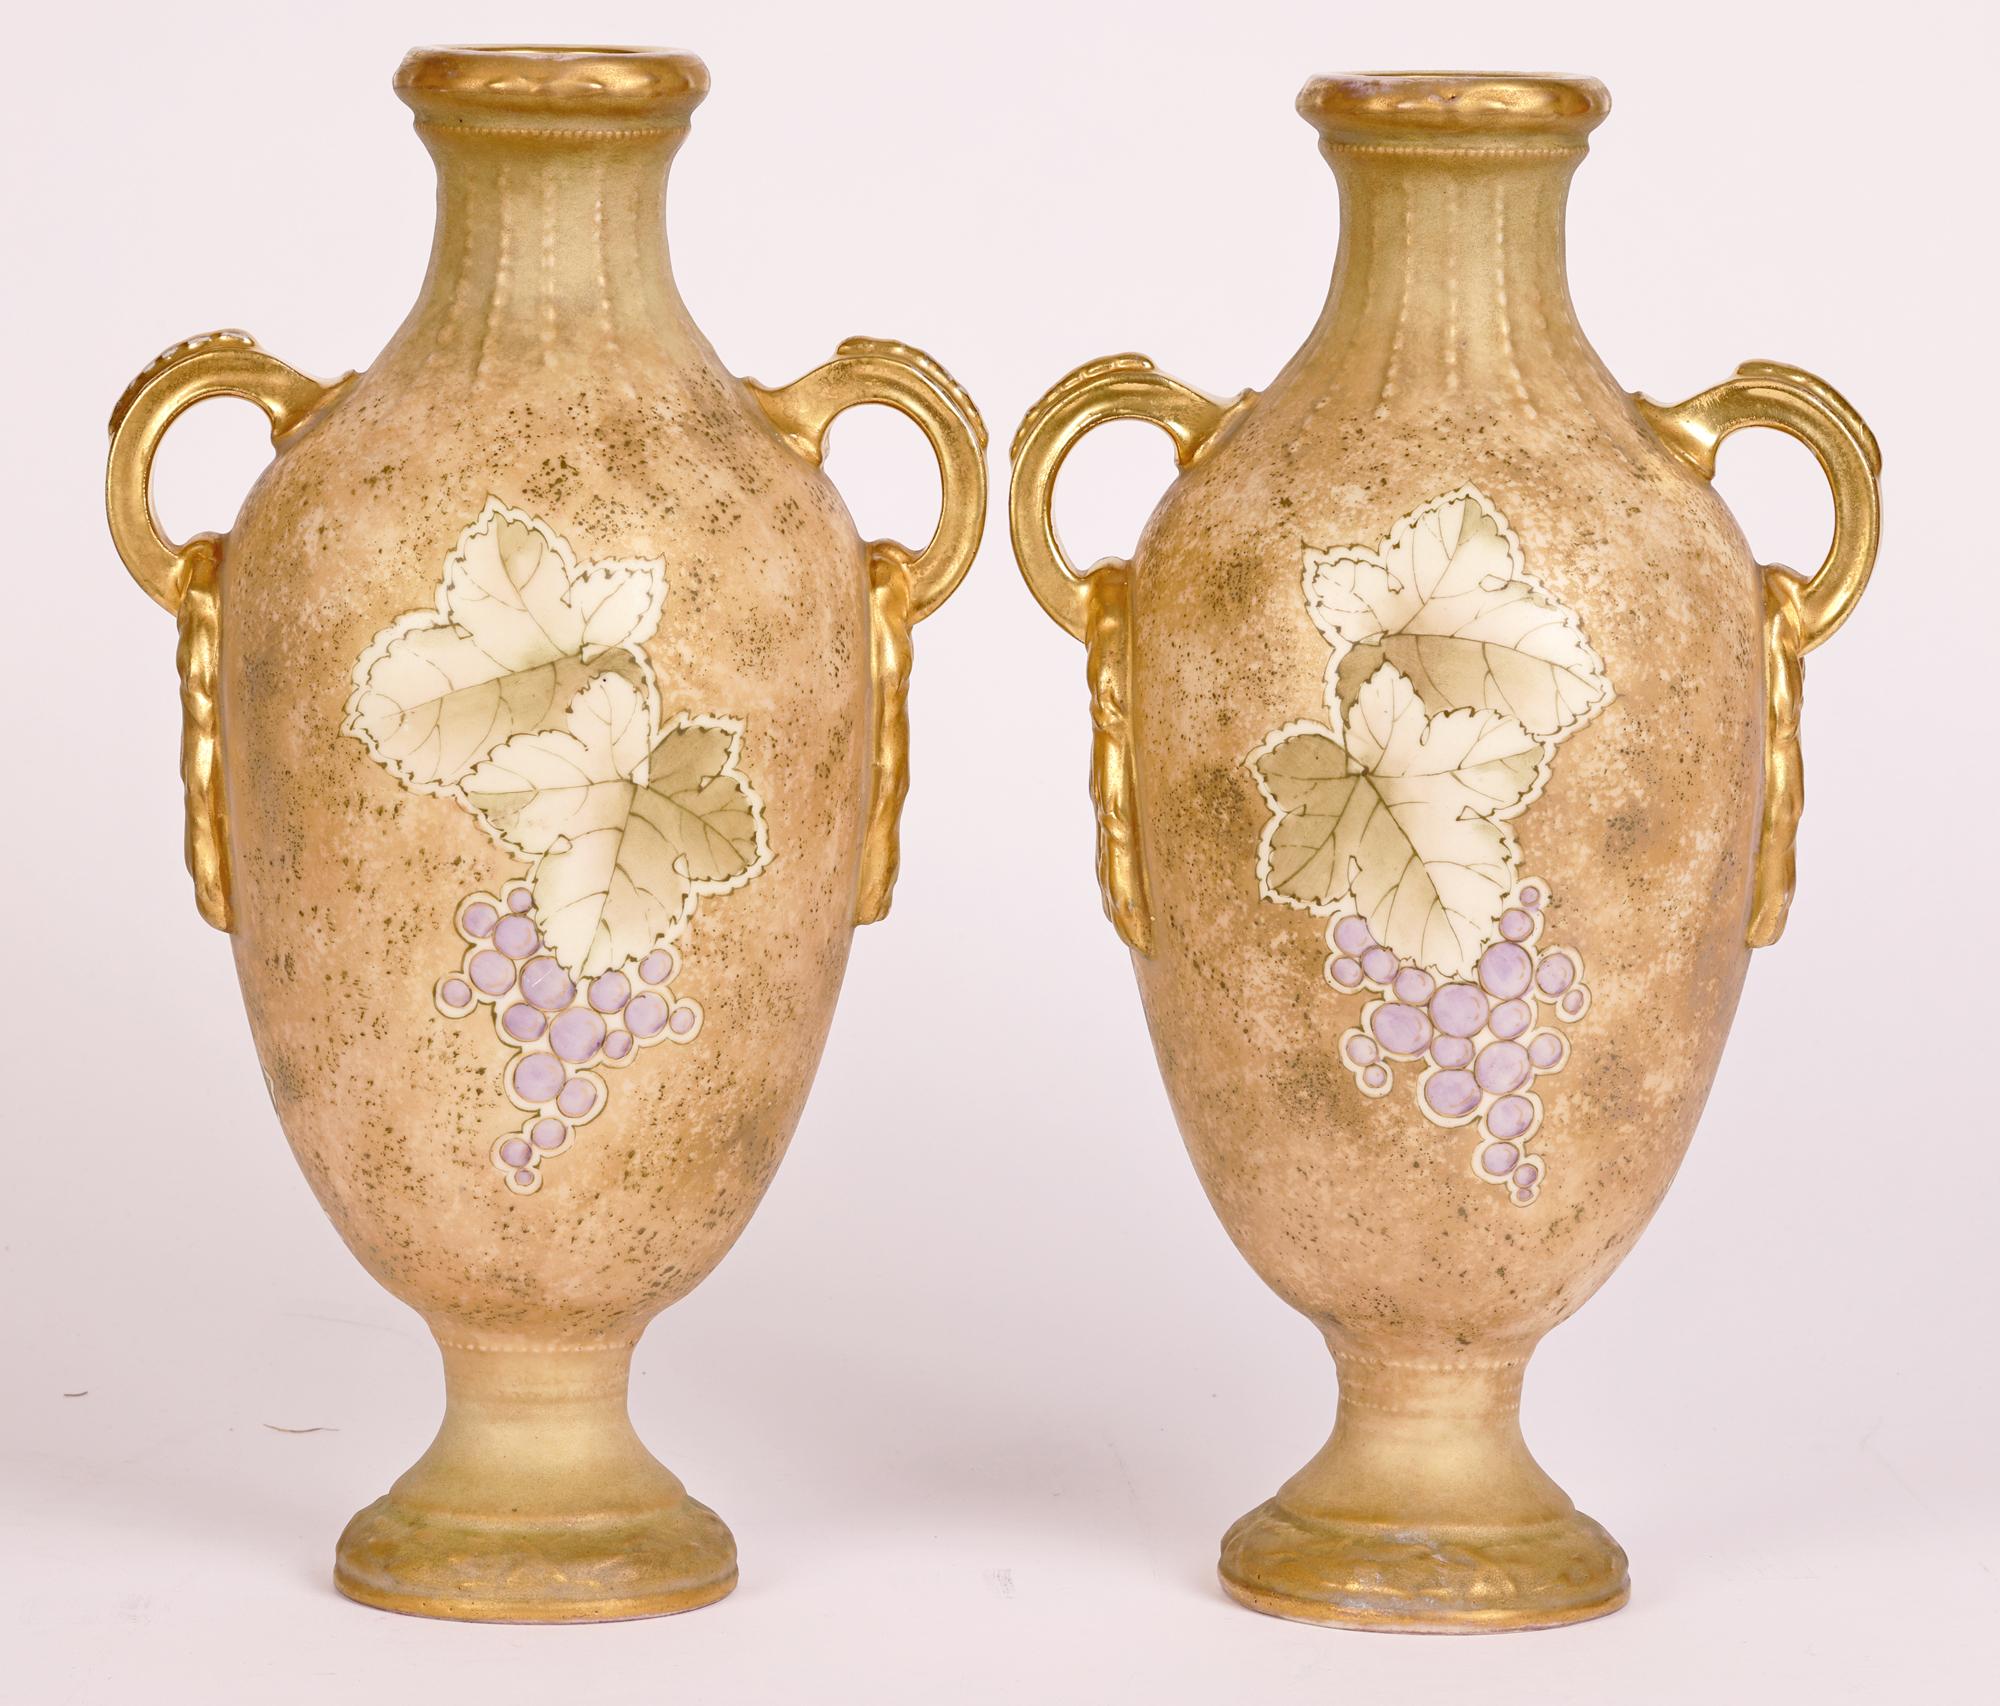 Turn Teplitz RSK Amphora Pair Art Nouveau Hand-Painted Twin Handled Vases For Sale 3